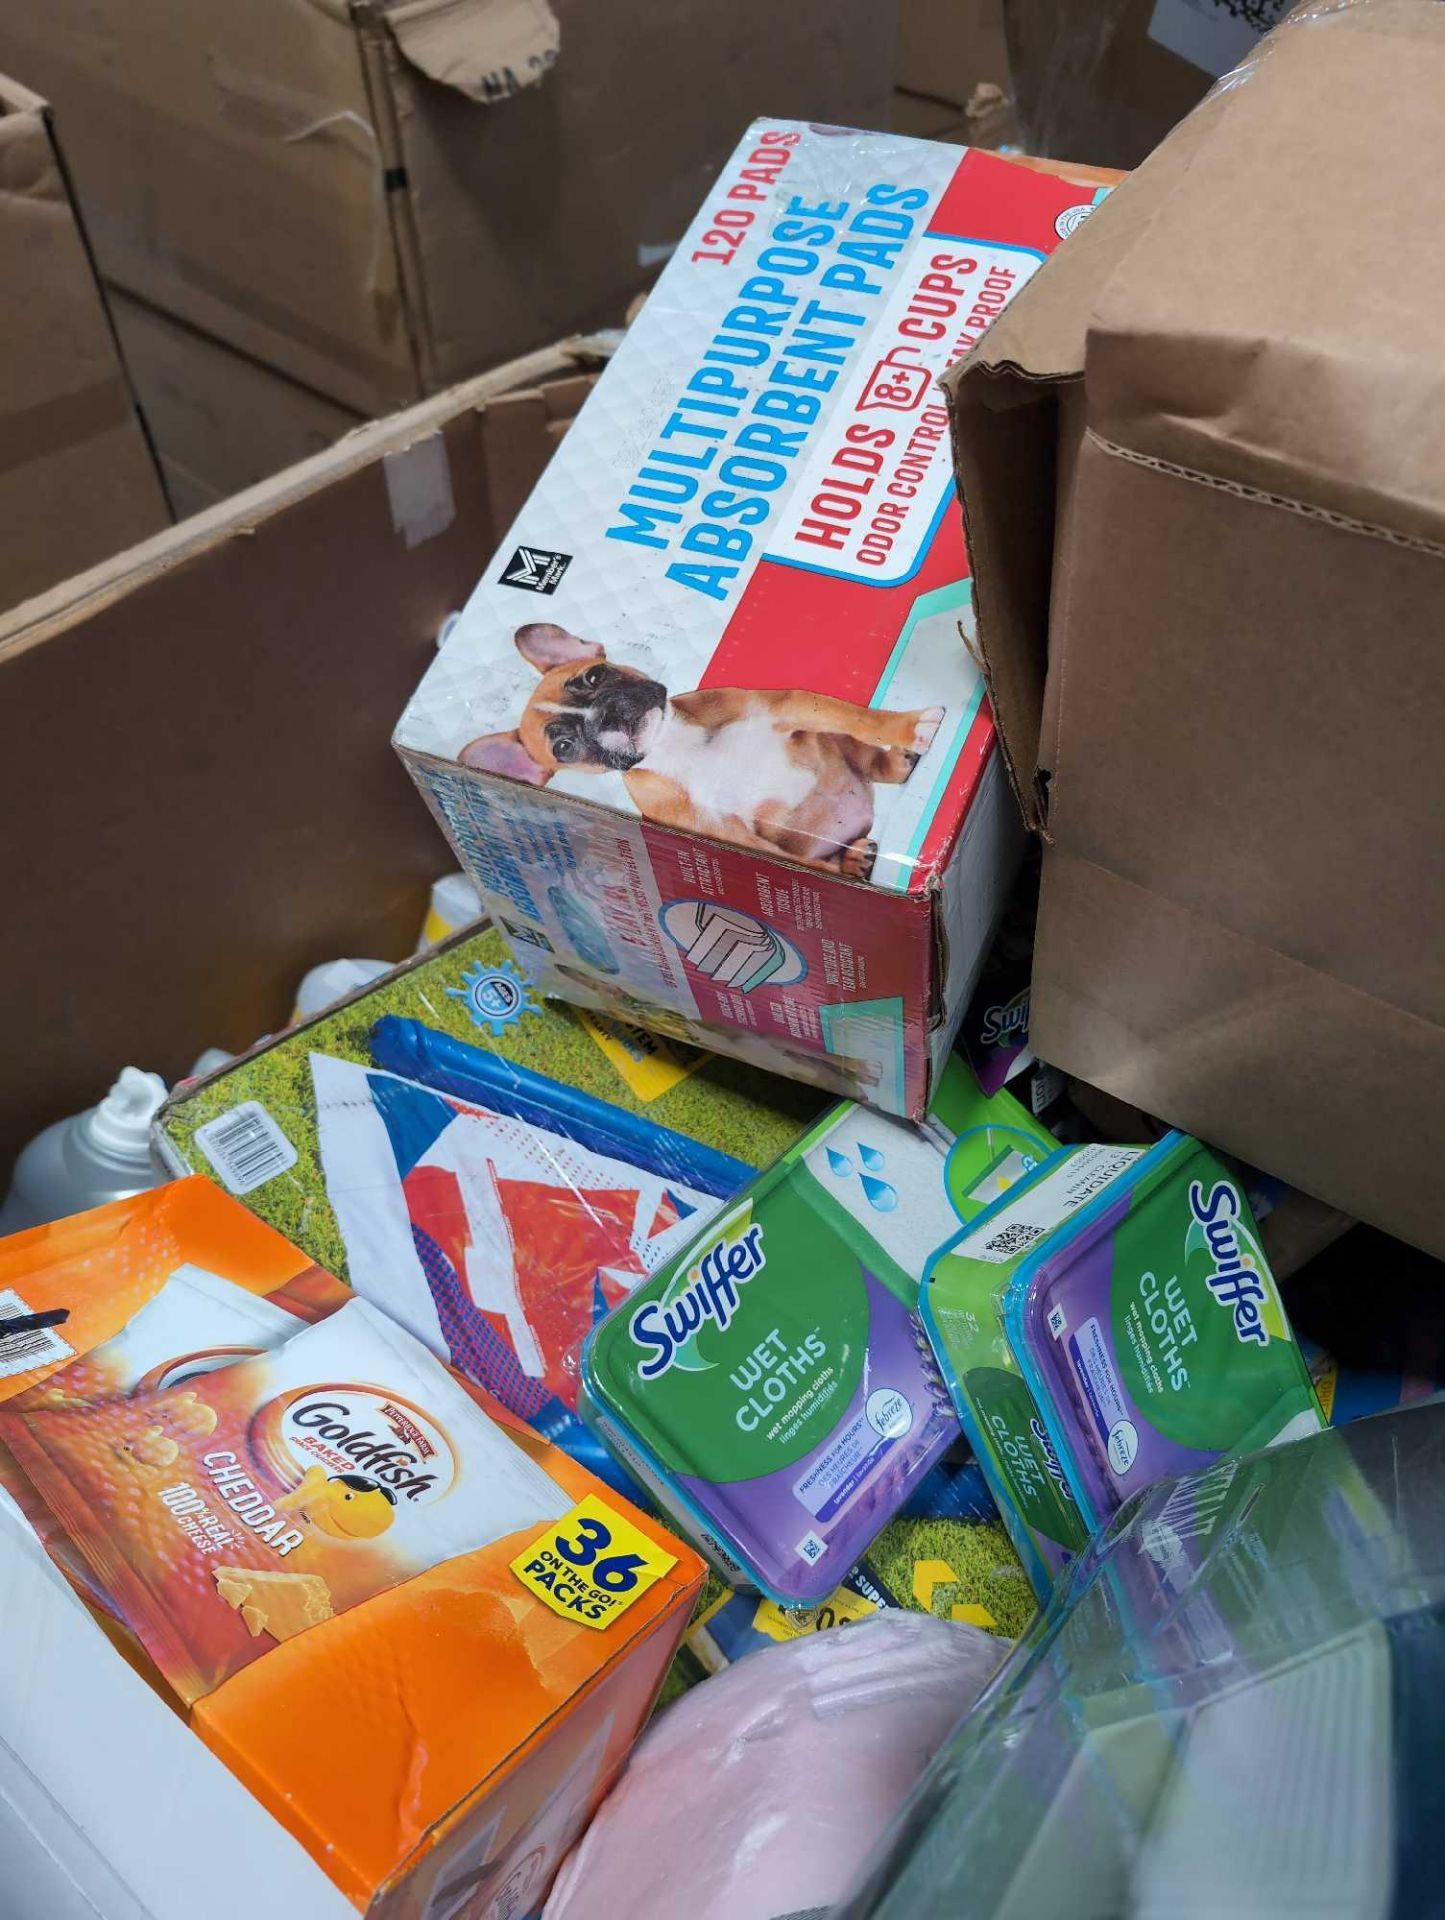 Big box store in a box, pampers, Sheets, Blanket, Intex blow up bed, swiffer wet cloths, gold fish, - Image 7 of 20